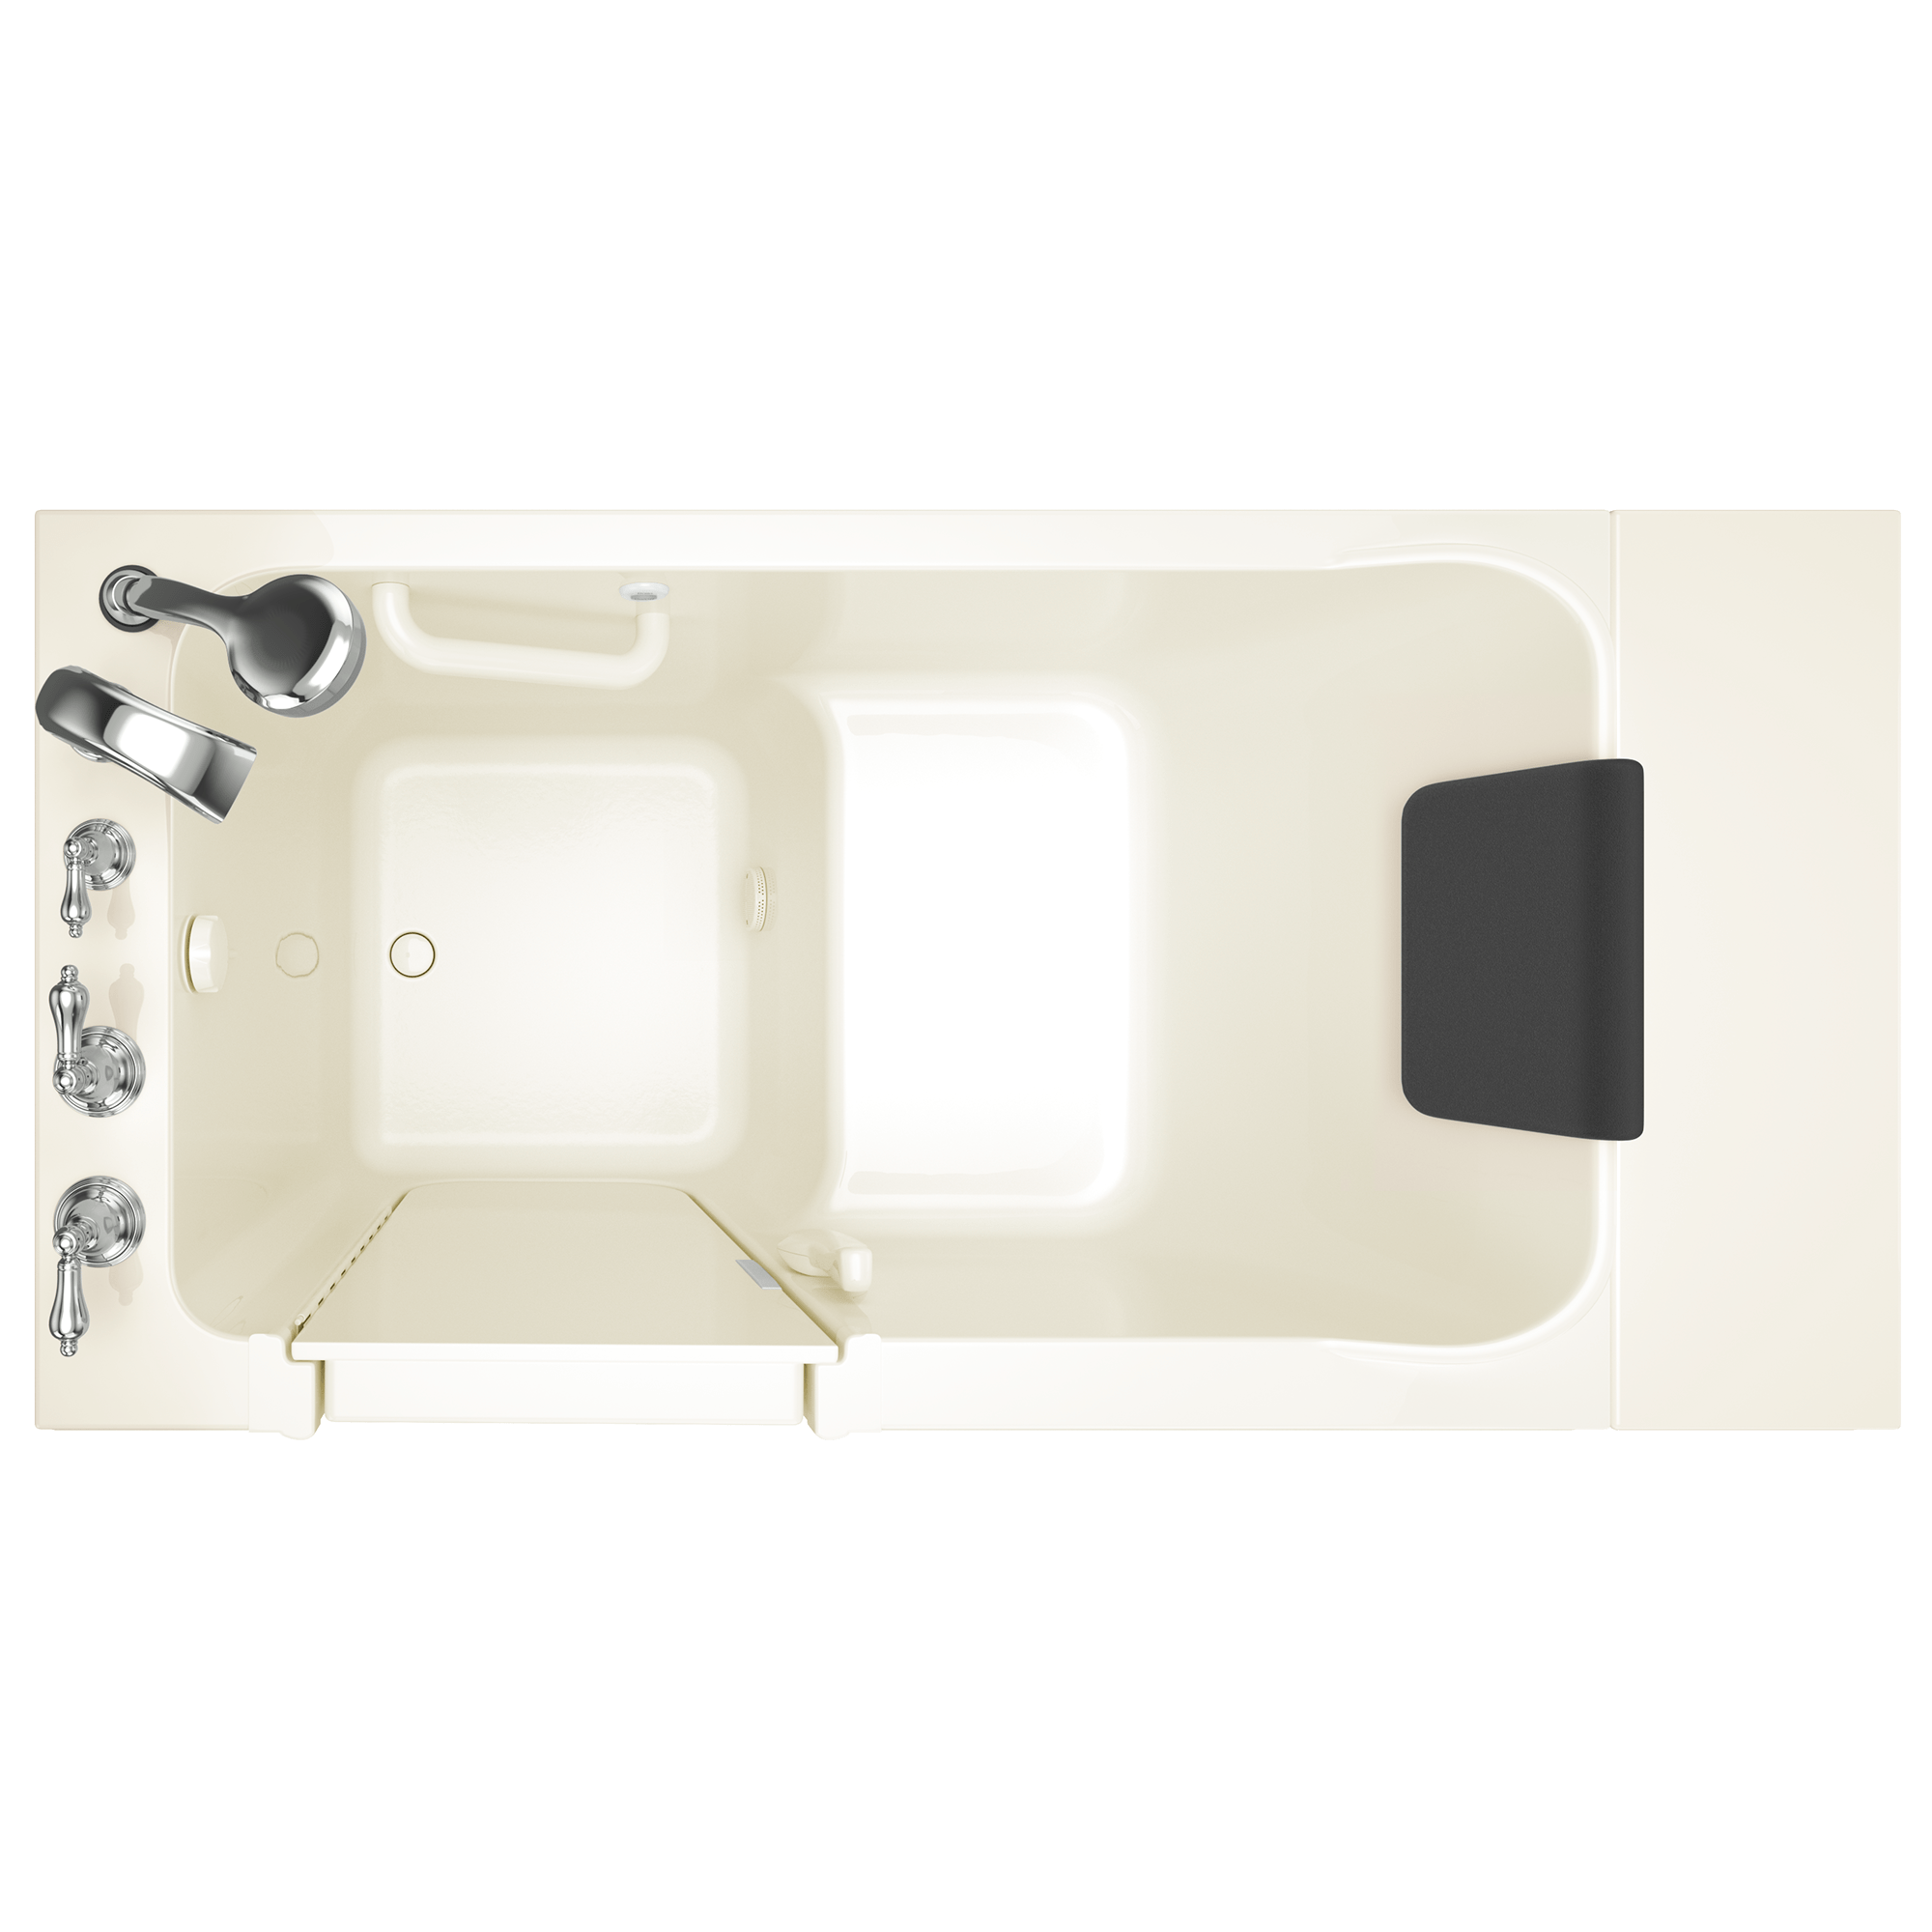 Acrylic Luxury Series 30 x 51  Inch Walk in Tub With Soaker System   Left Hand Drain With Faucet WIB LINEN